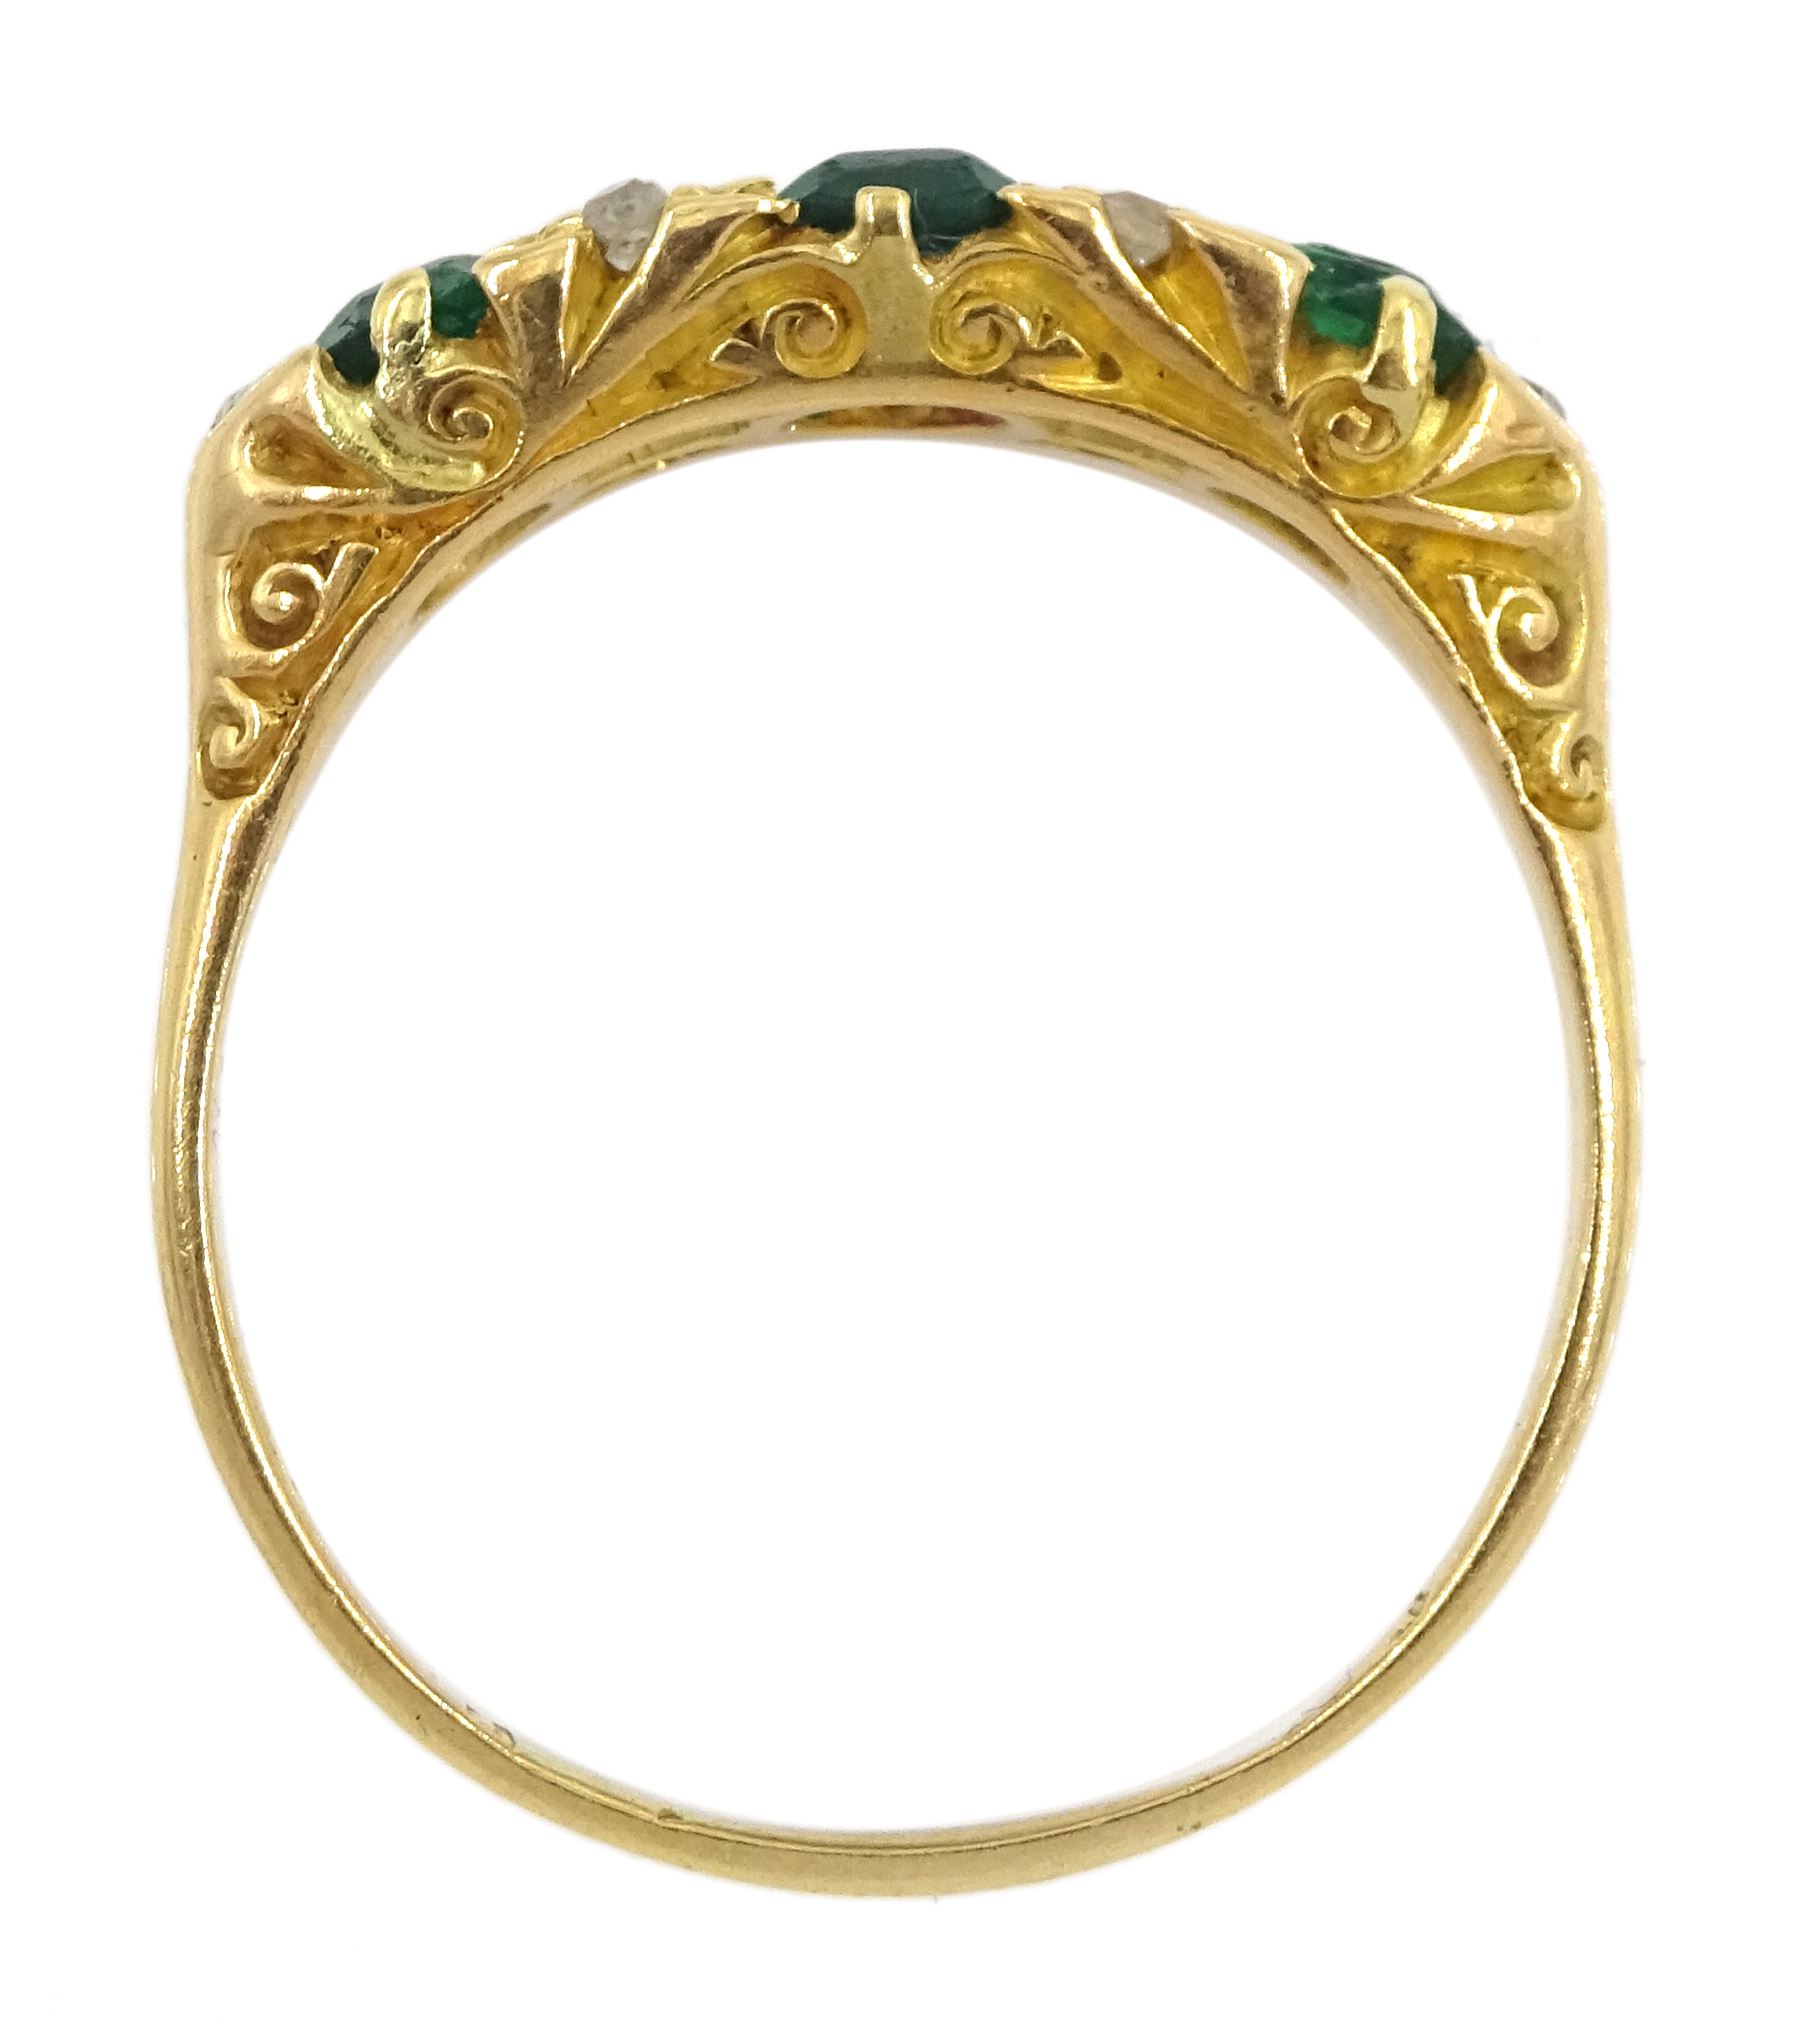 Early 20th century 18ct gold three stone emerald ring - Image 4 of 4